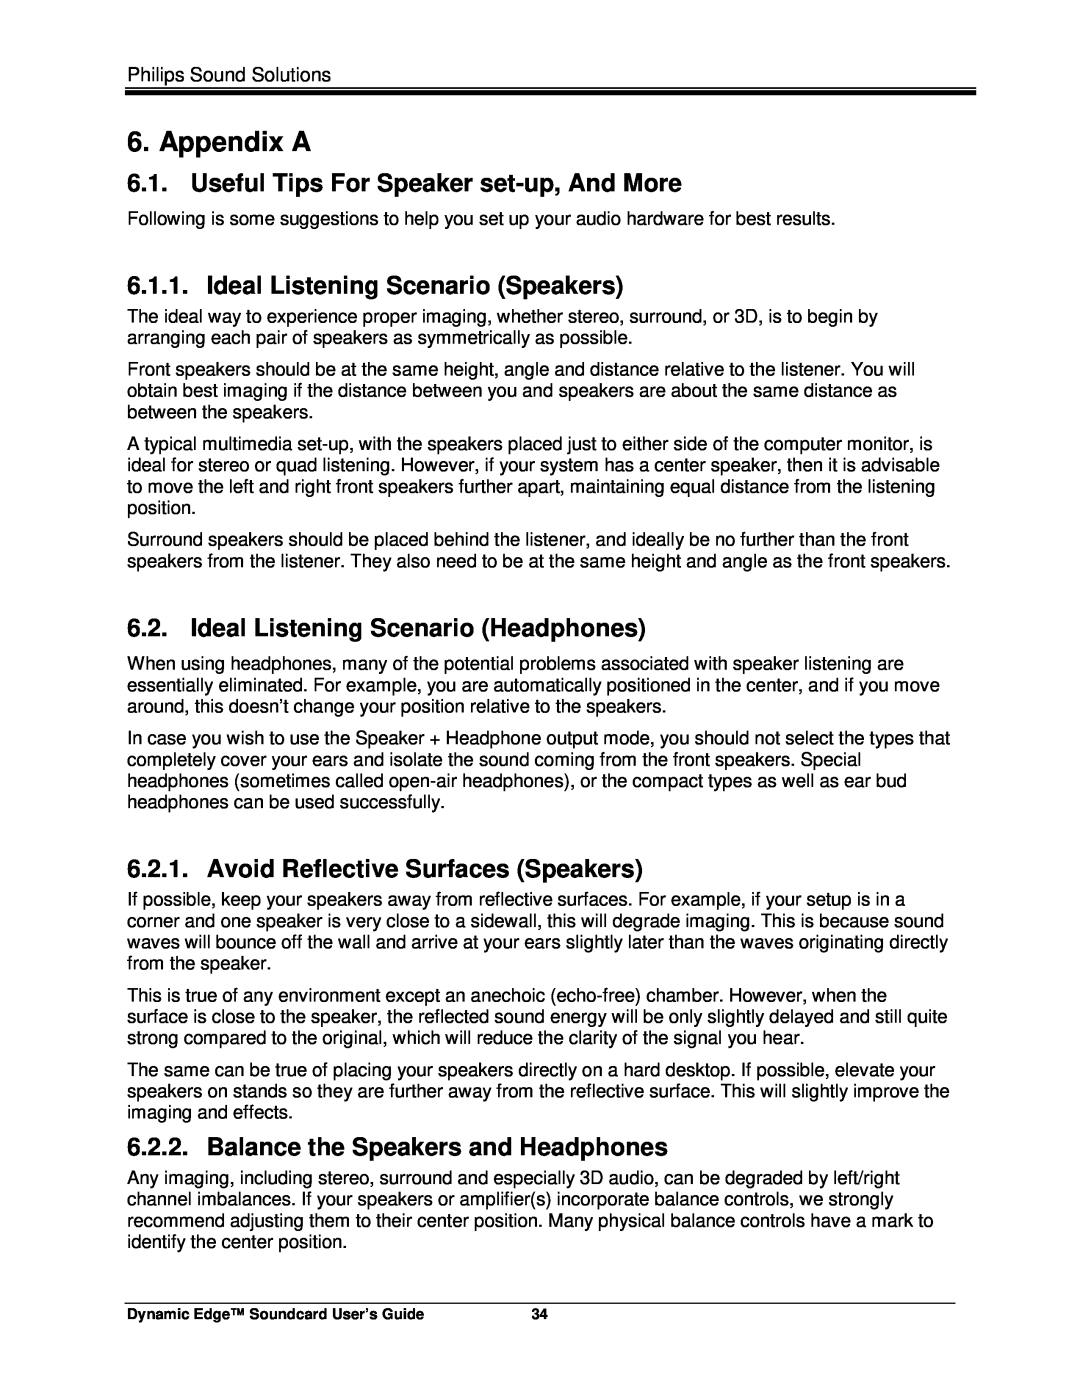 Philips PSC604 manual Appendix A, Useful Tips For Speaker set-up, And More, Ideal Listening Scenario Speakers 